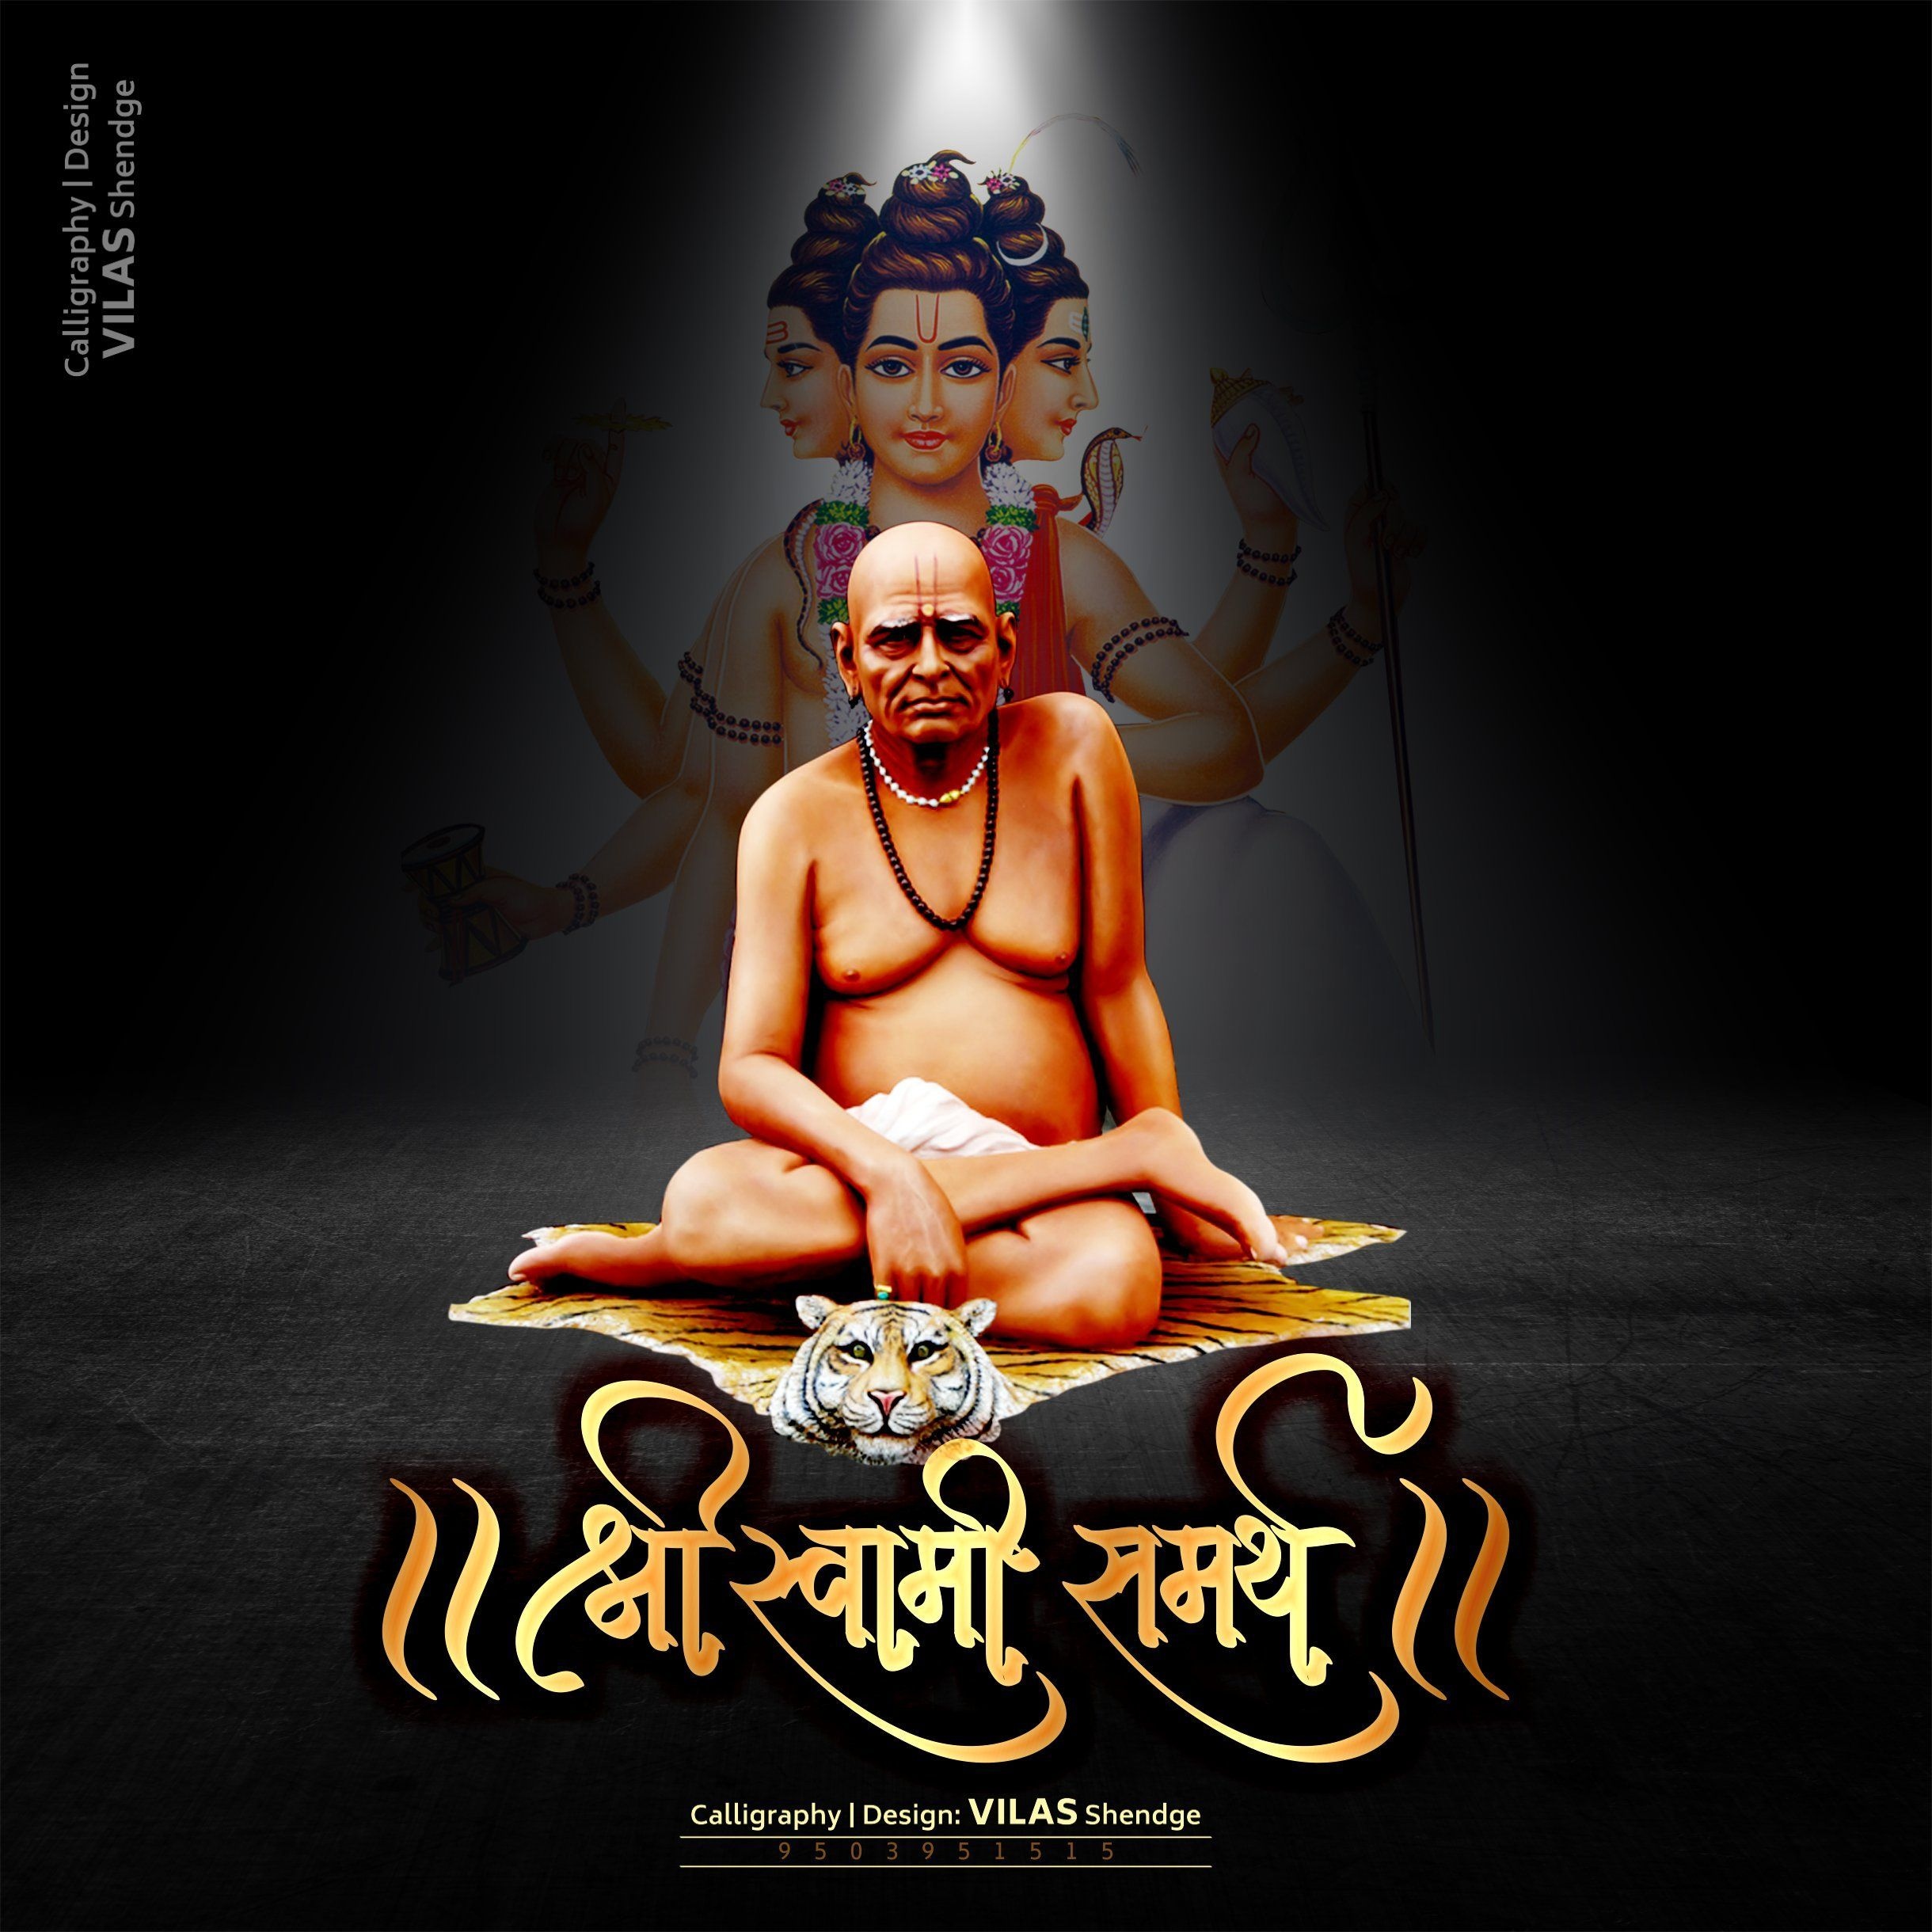 Swami Samarth Images Wallpapers